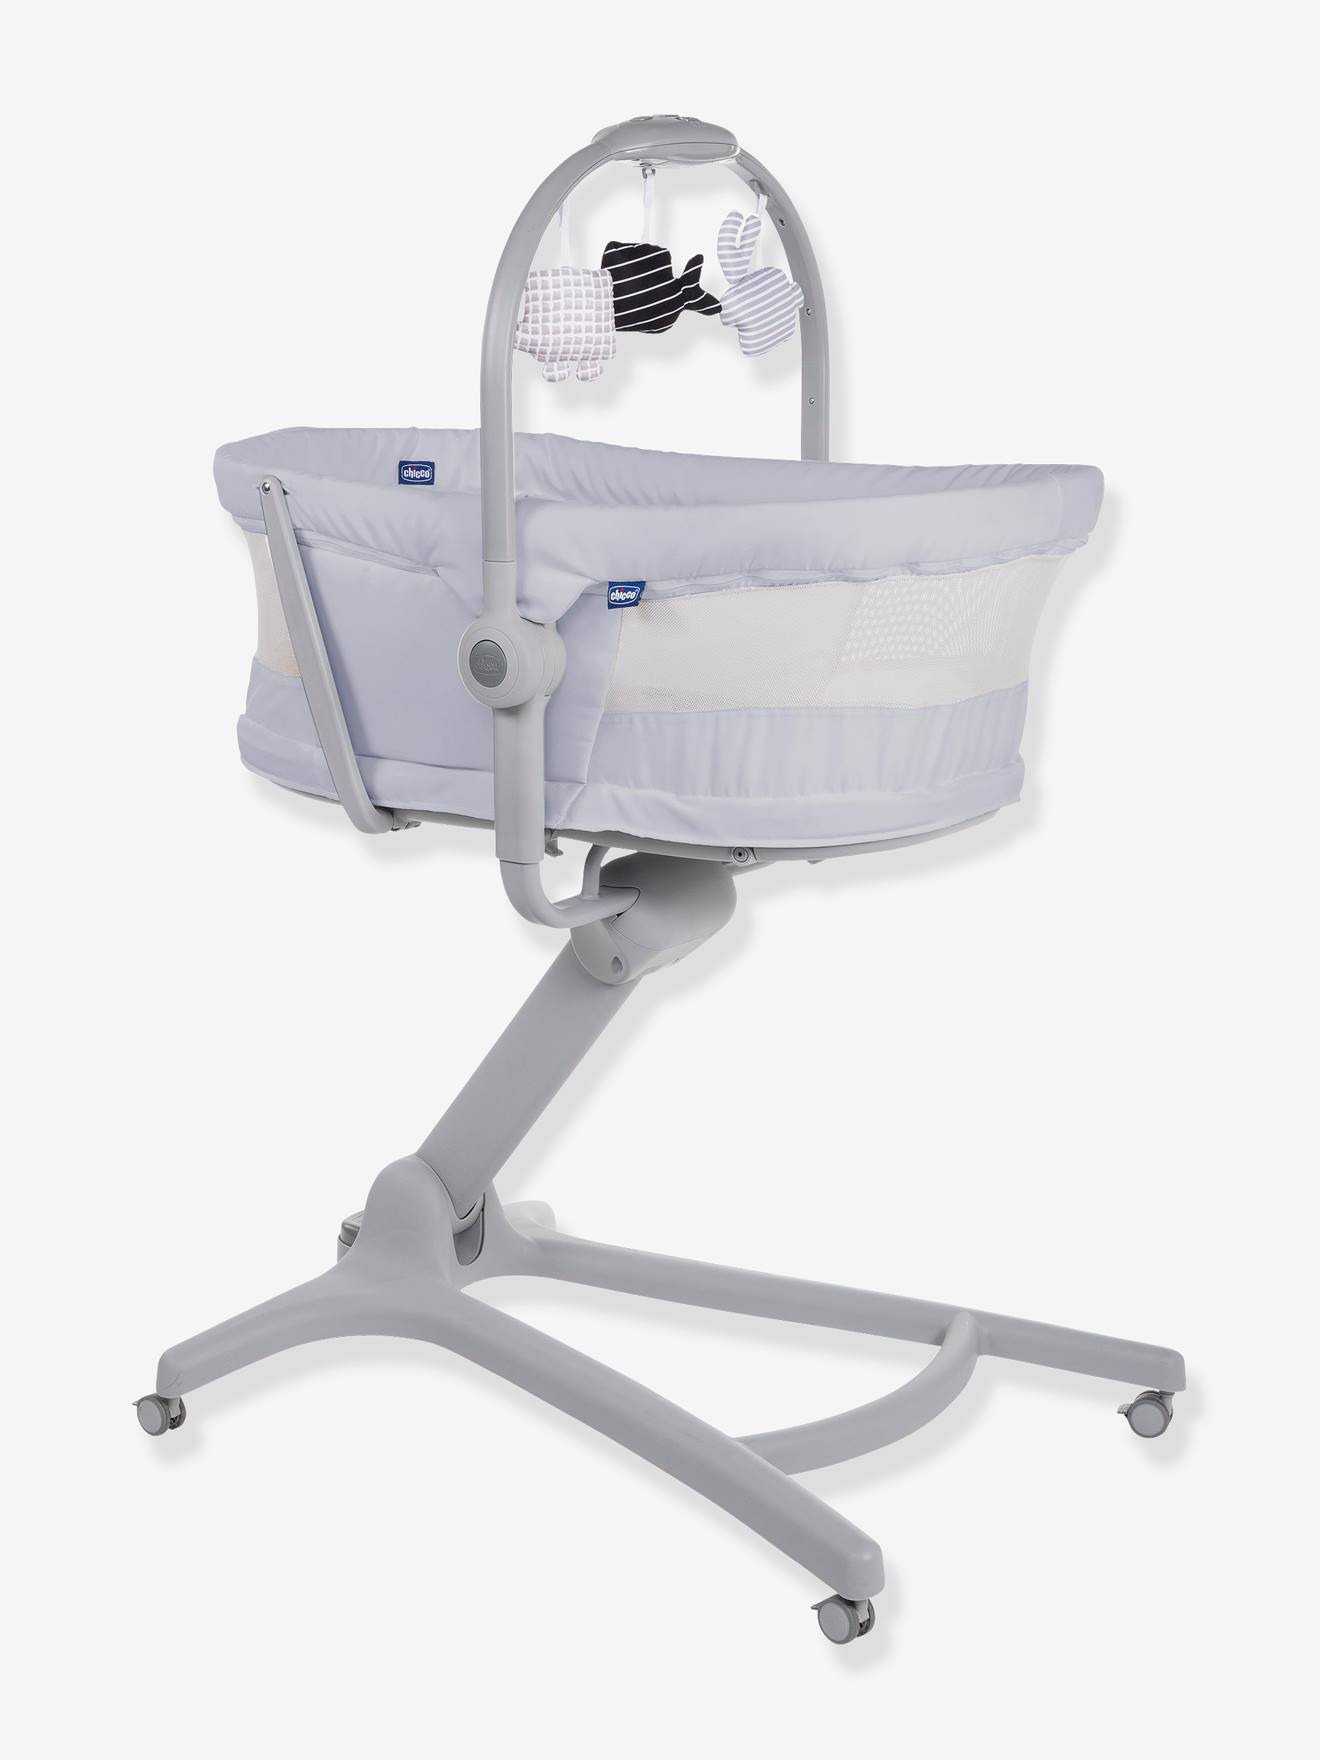 Baby Hug 4-in-1 Air CHICCO stone